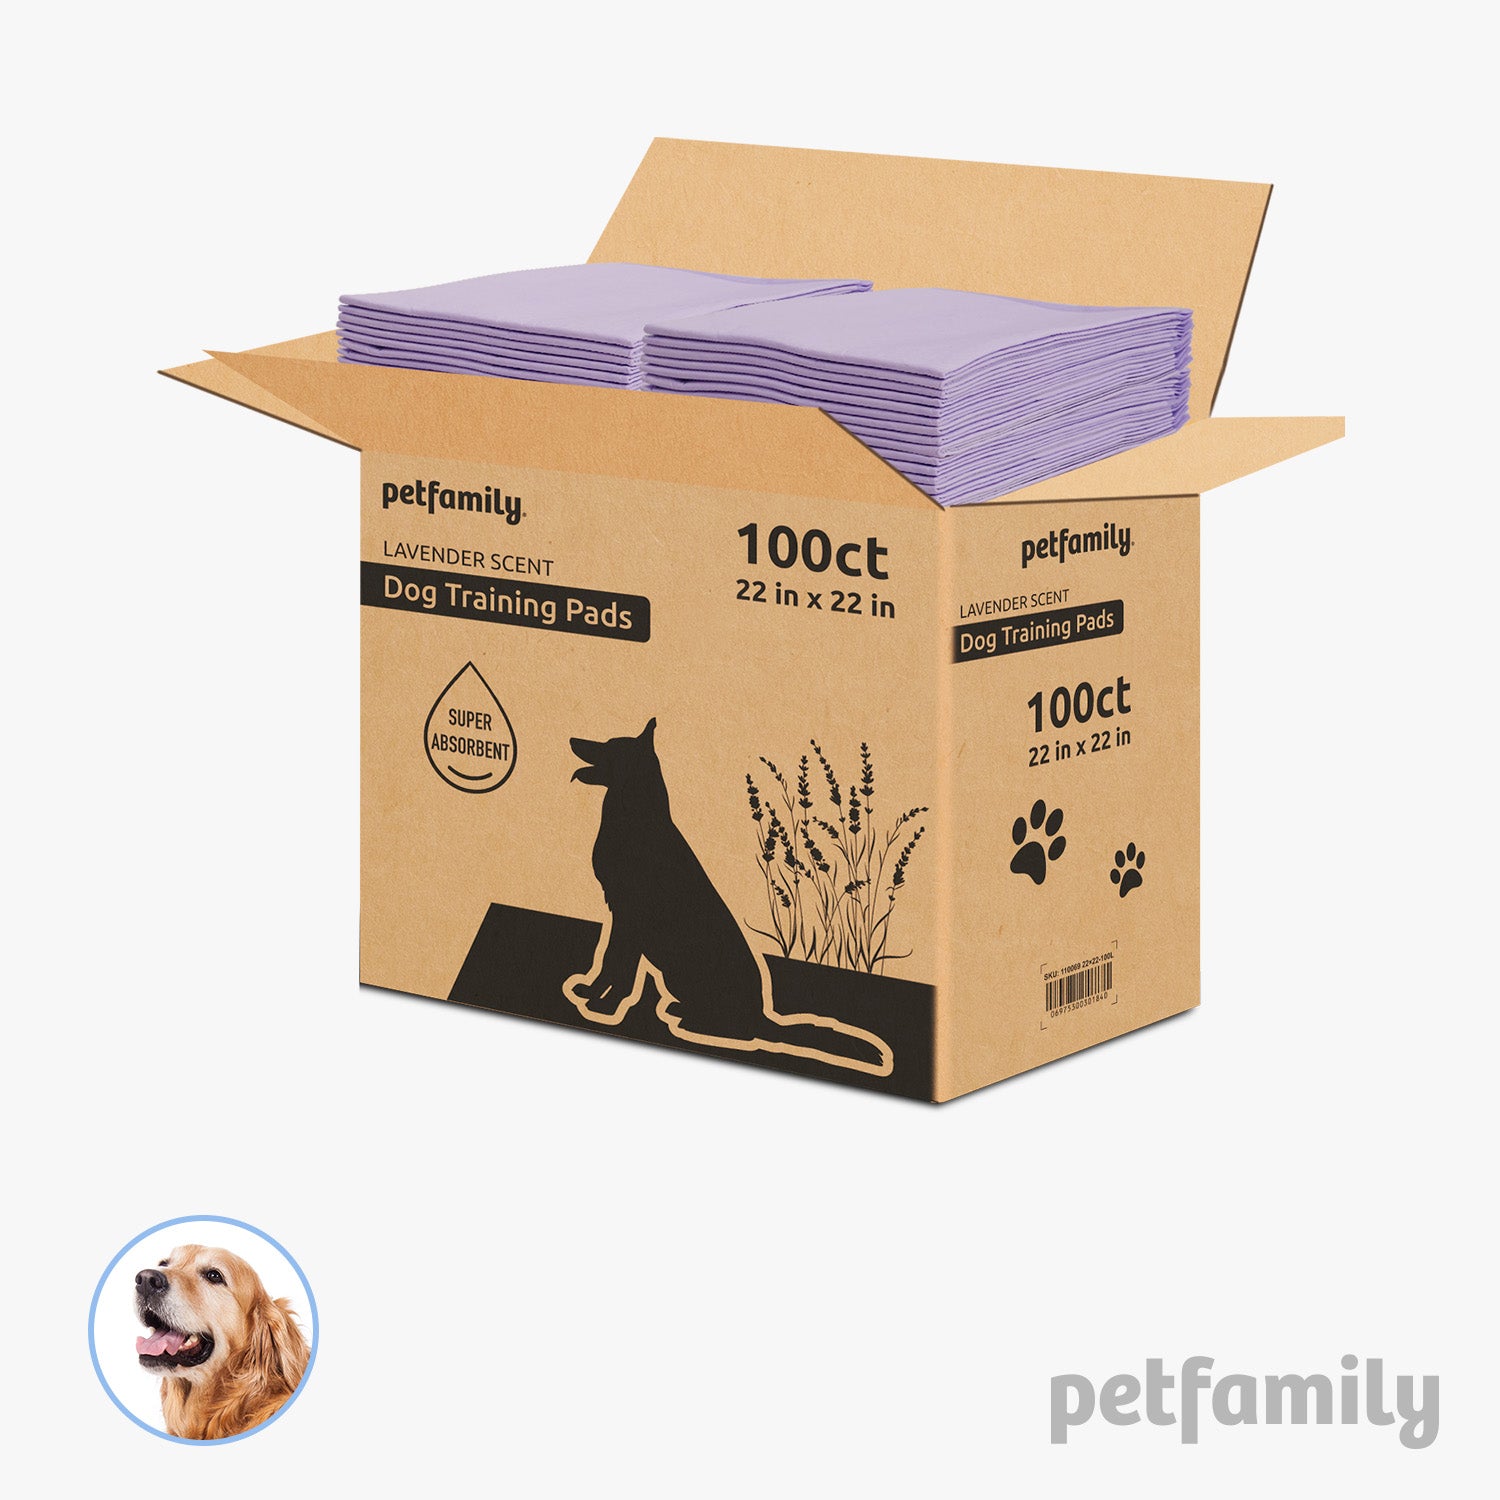 Dog Training Pads 22" x 22", Lavender Scent, 100 Pieces - Quick Drying and Ultra Absorbent